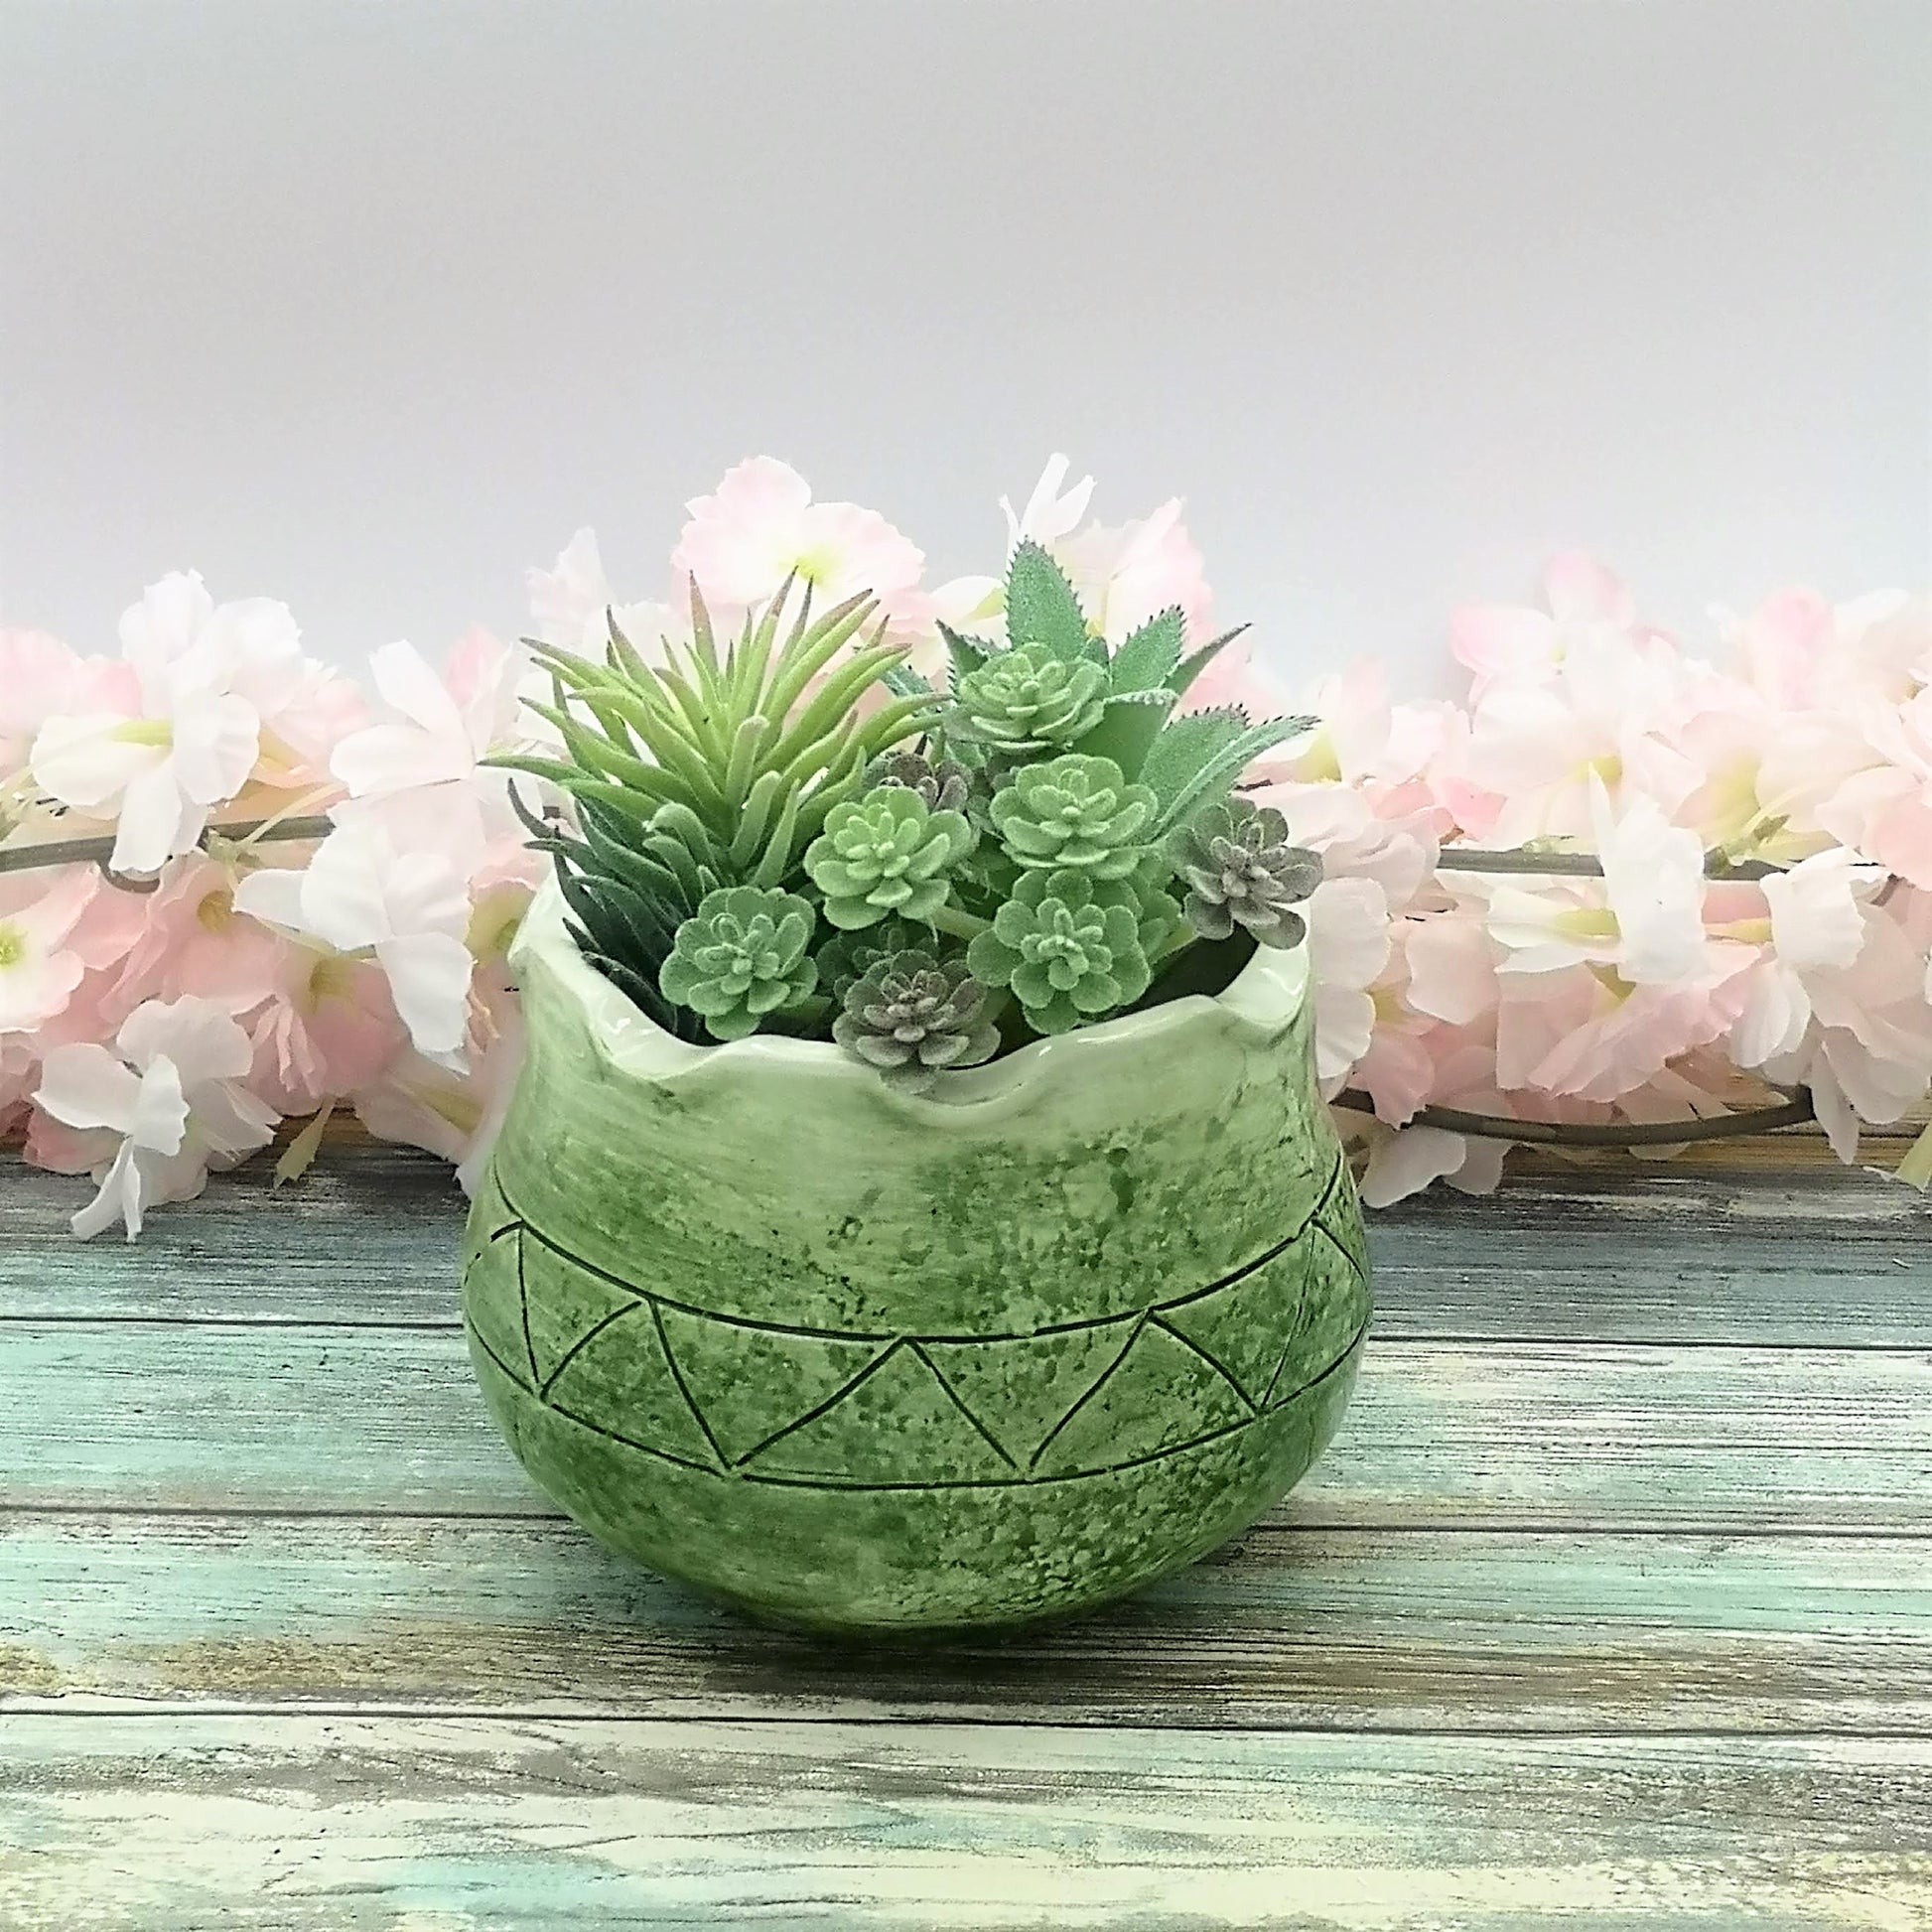 handmade ceramic planter, succulent pots, office desk accessories for women, 9th anniversary gift for wife, housewarming gift first home - Ceramica Ana Rafael